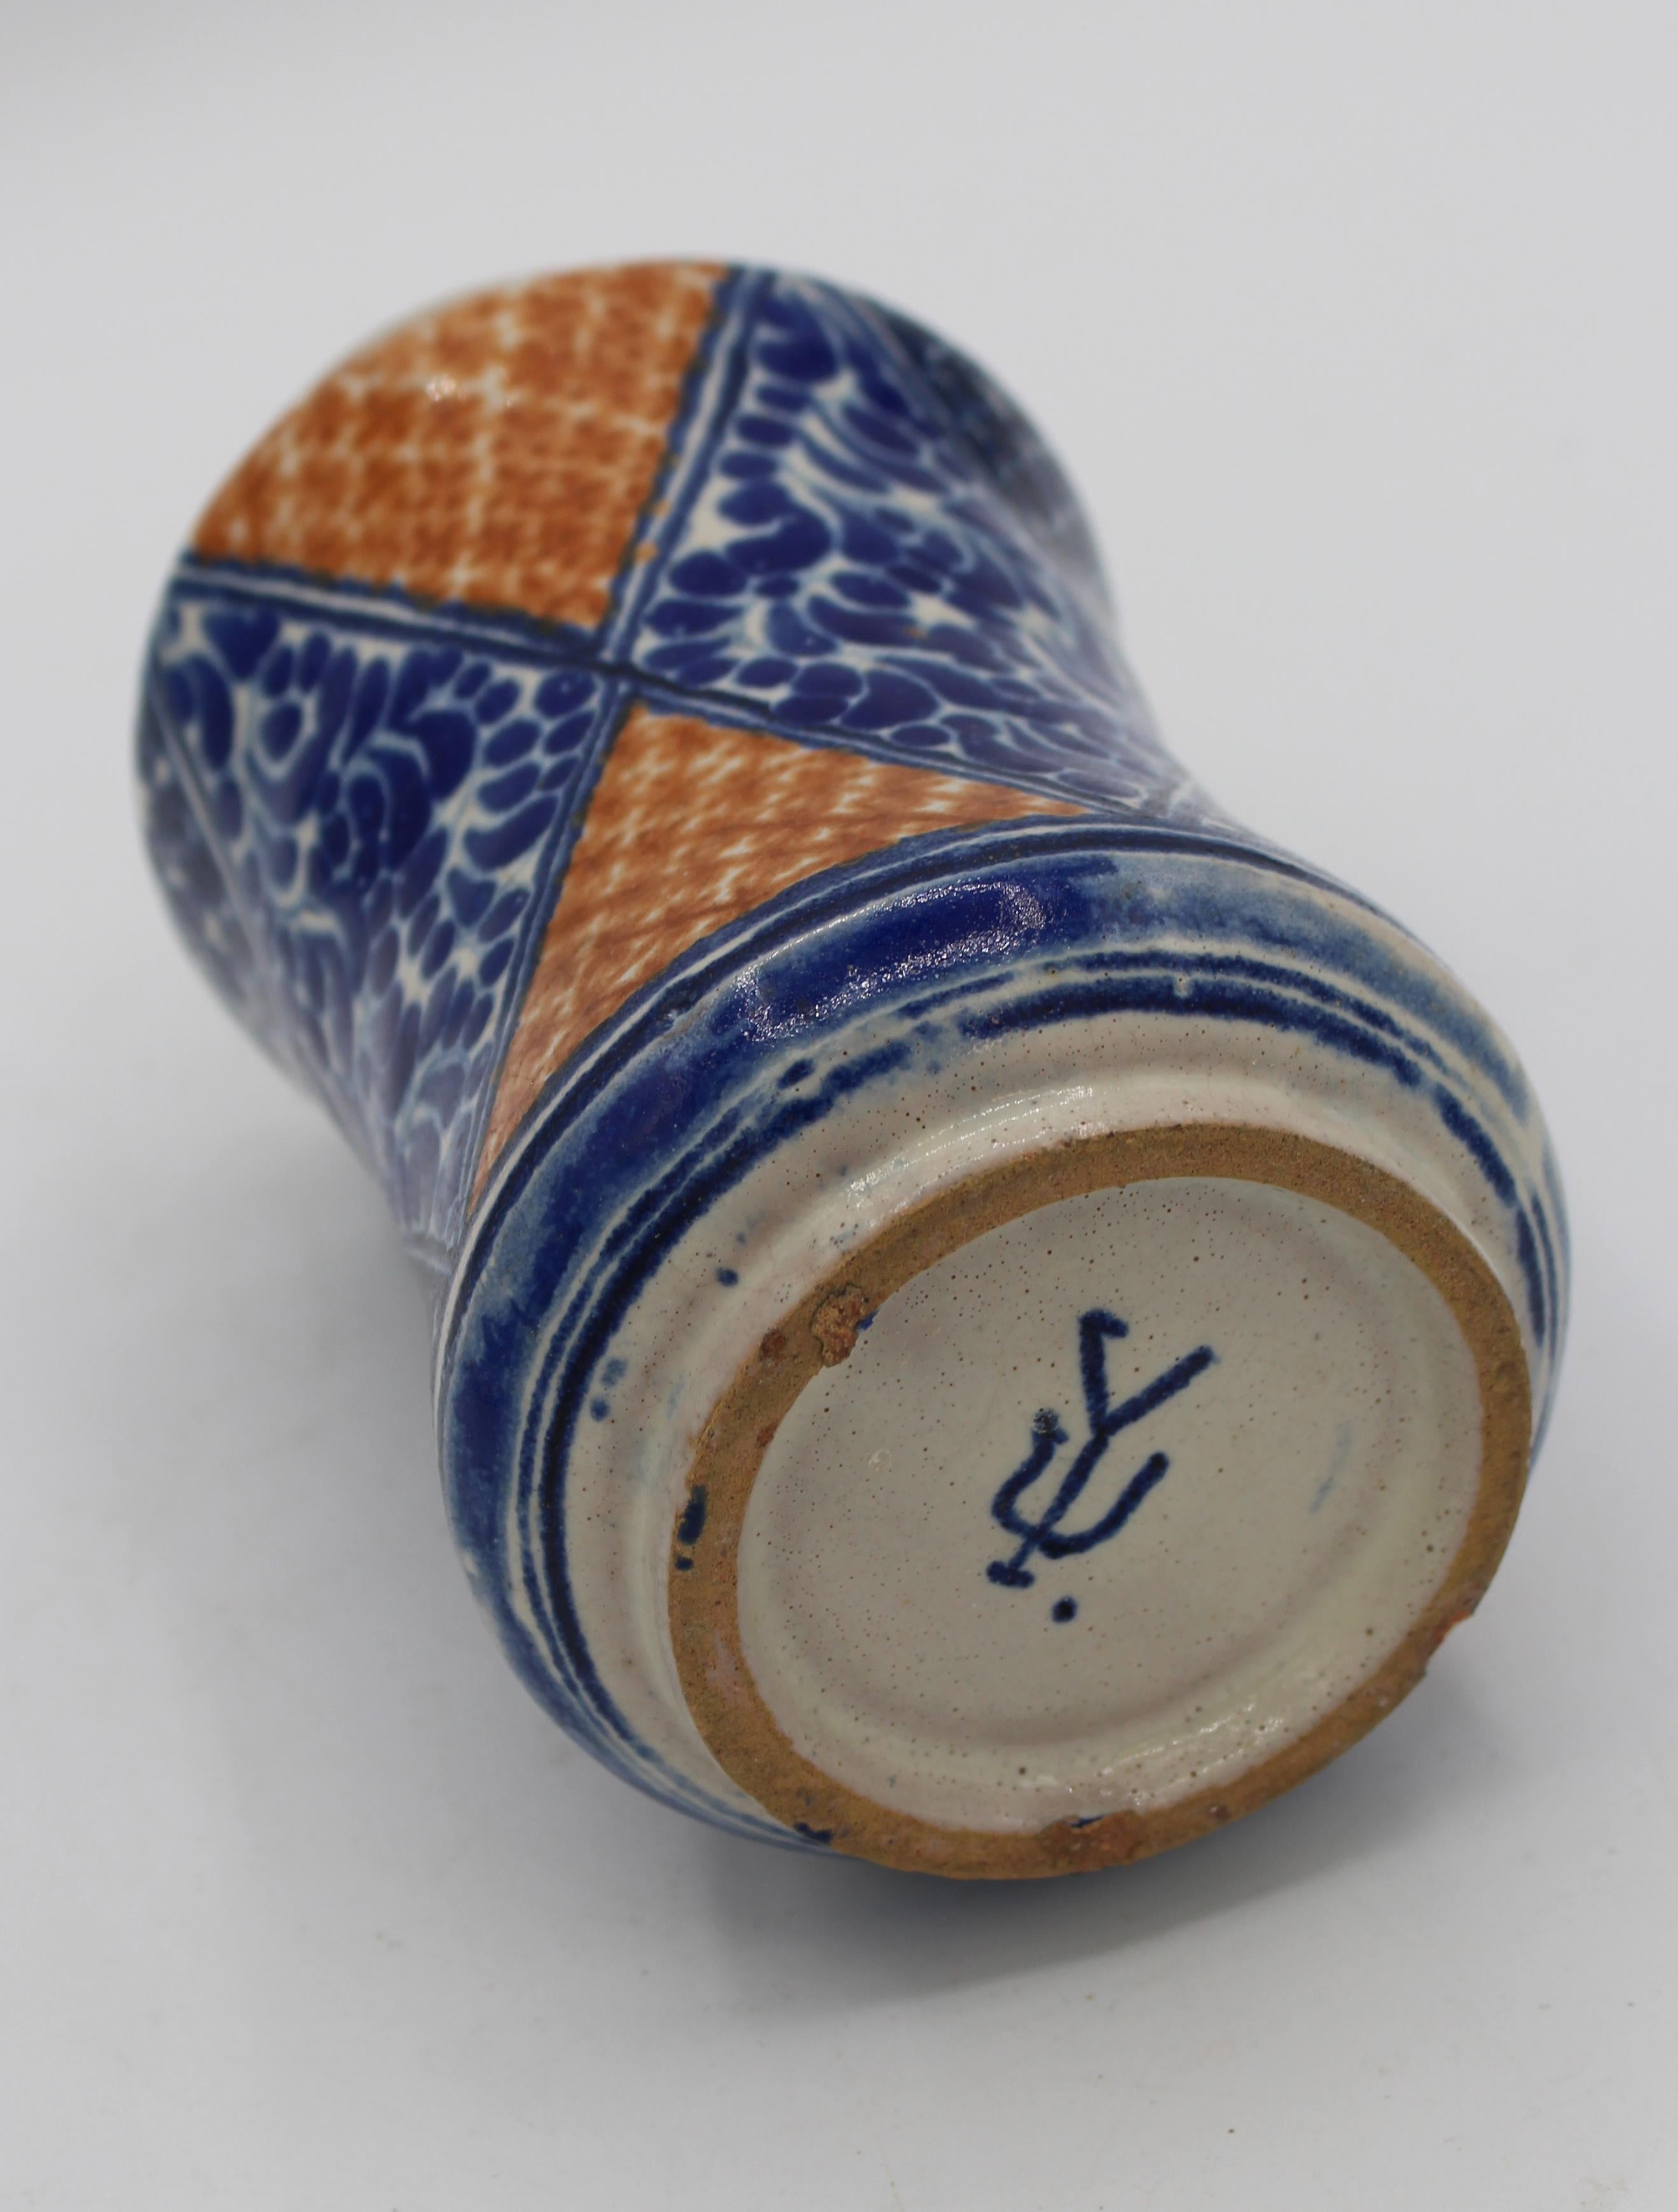 Circa 1890-1910 Uriarte Talavera Apothecary Jar In Good Condition For Sale In Chapel Hill, NC